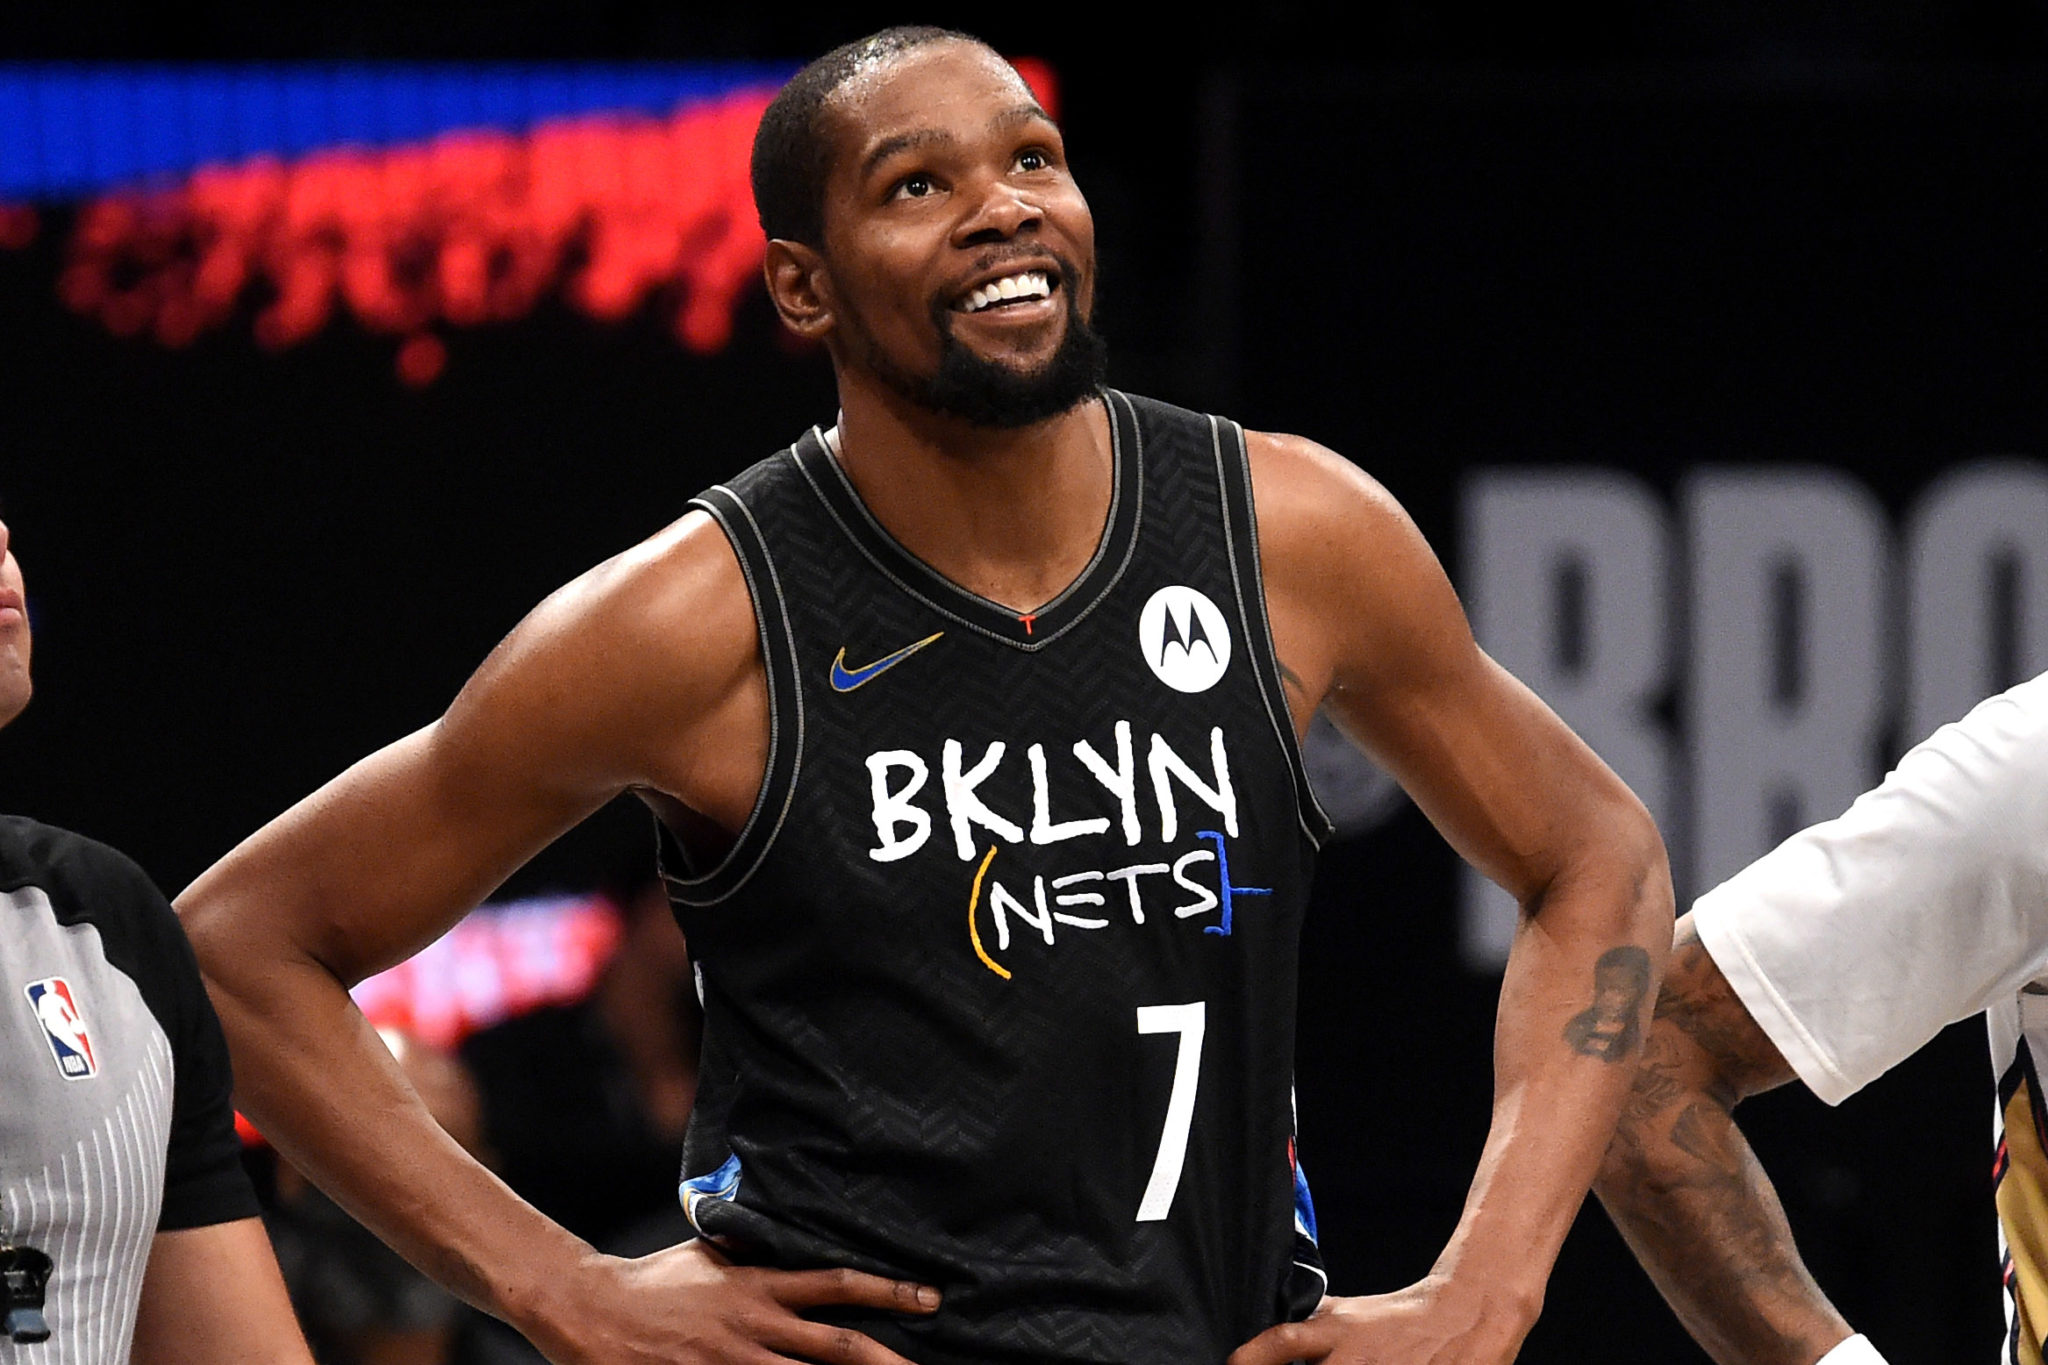 Kevin Durant of the Nets